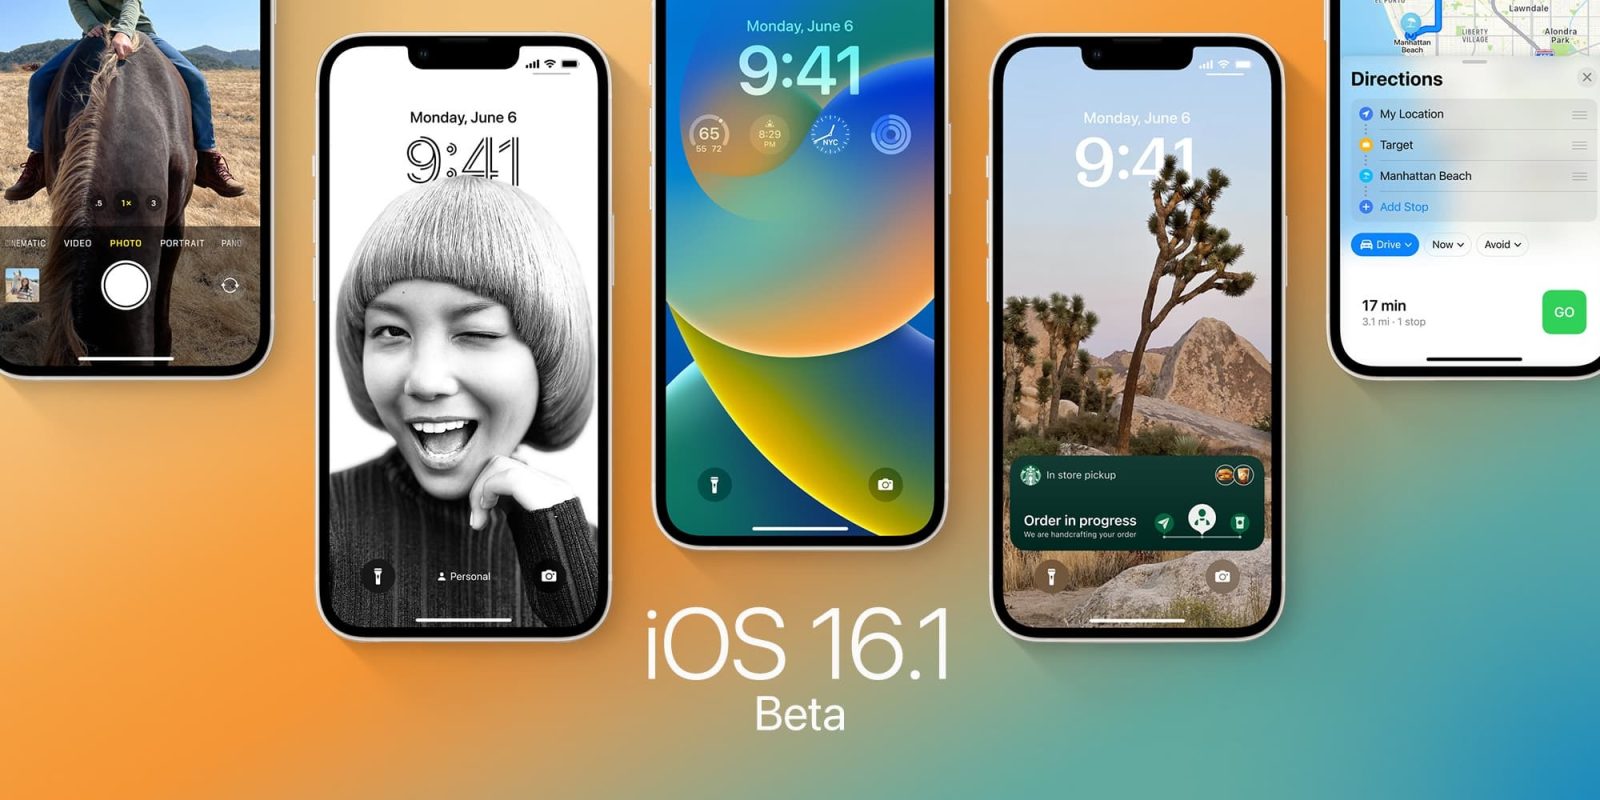 iOS 16.1 beta 5 now available ahead of public release later this month